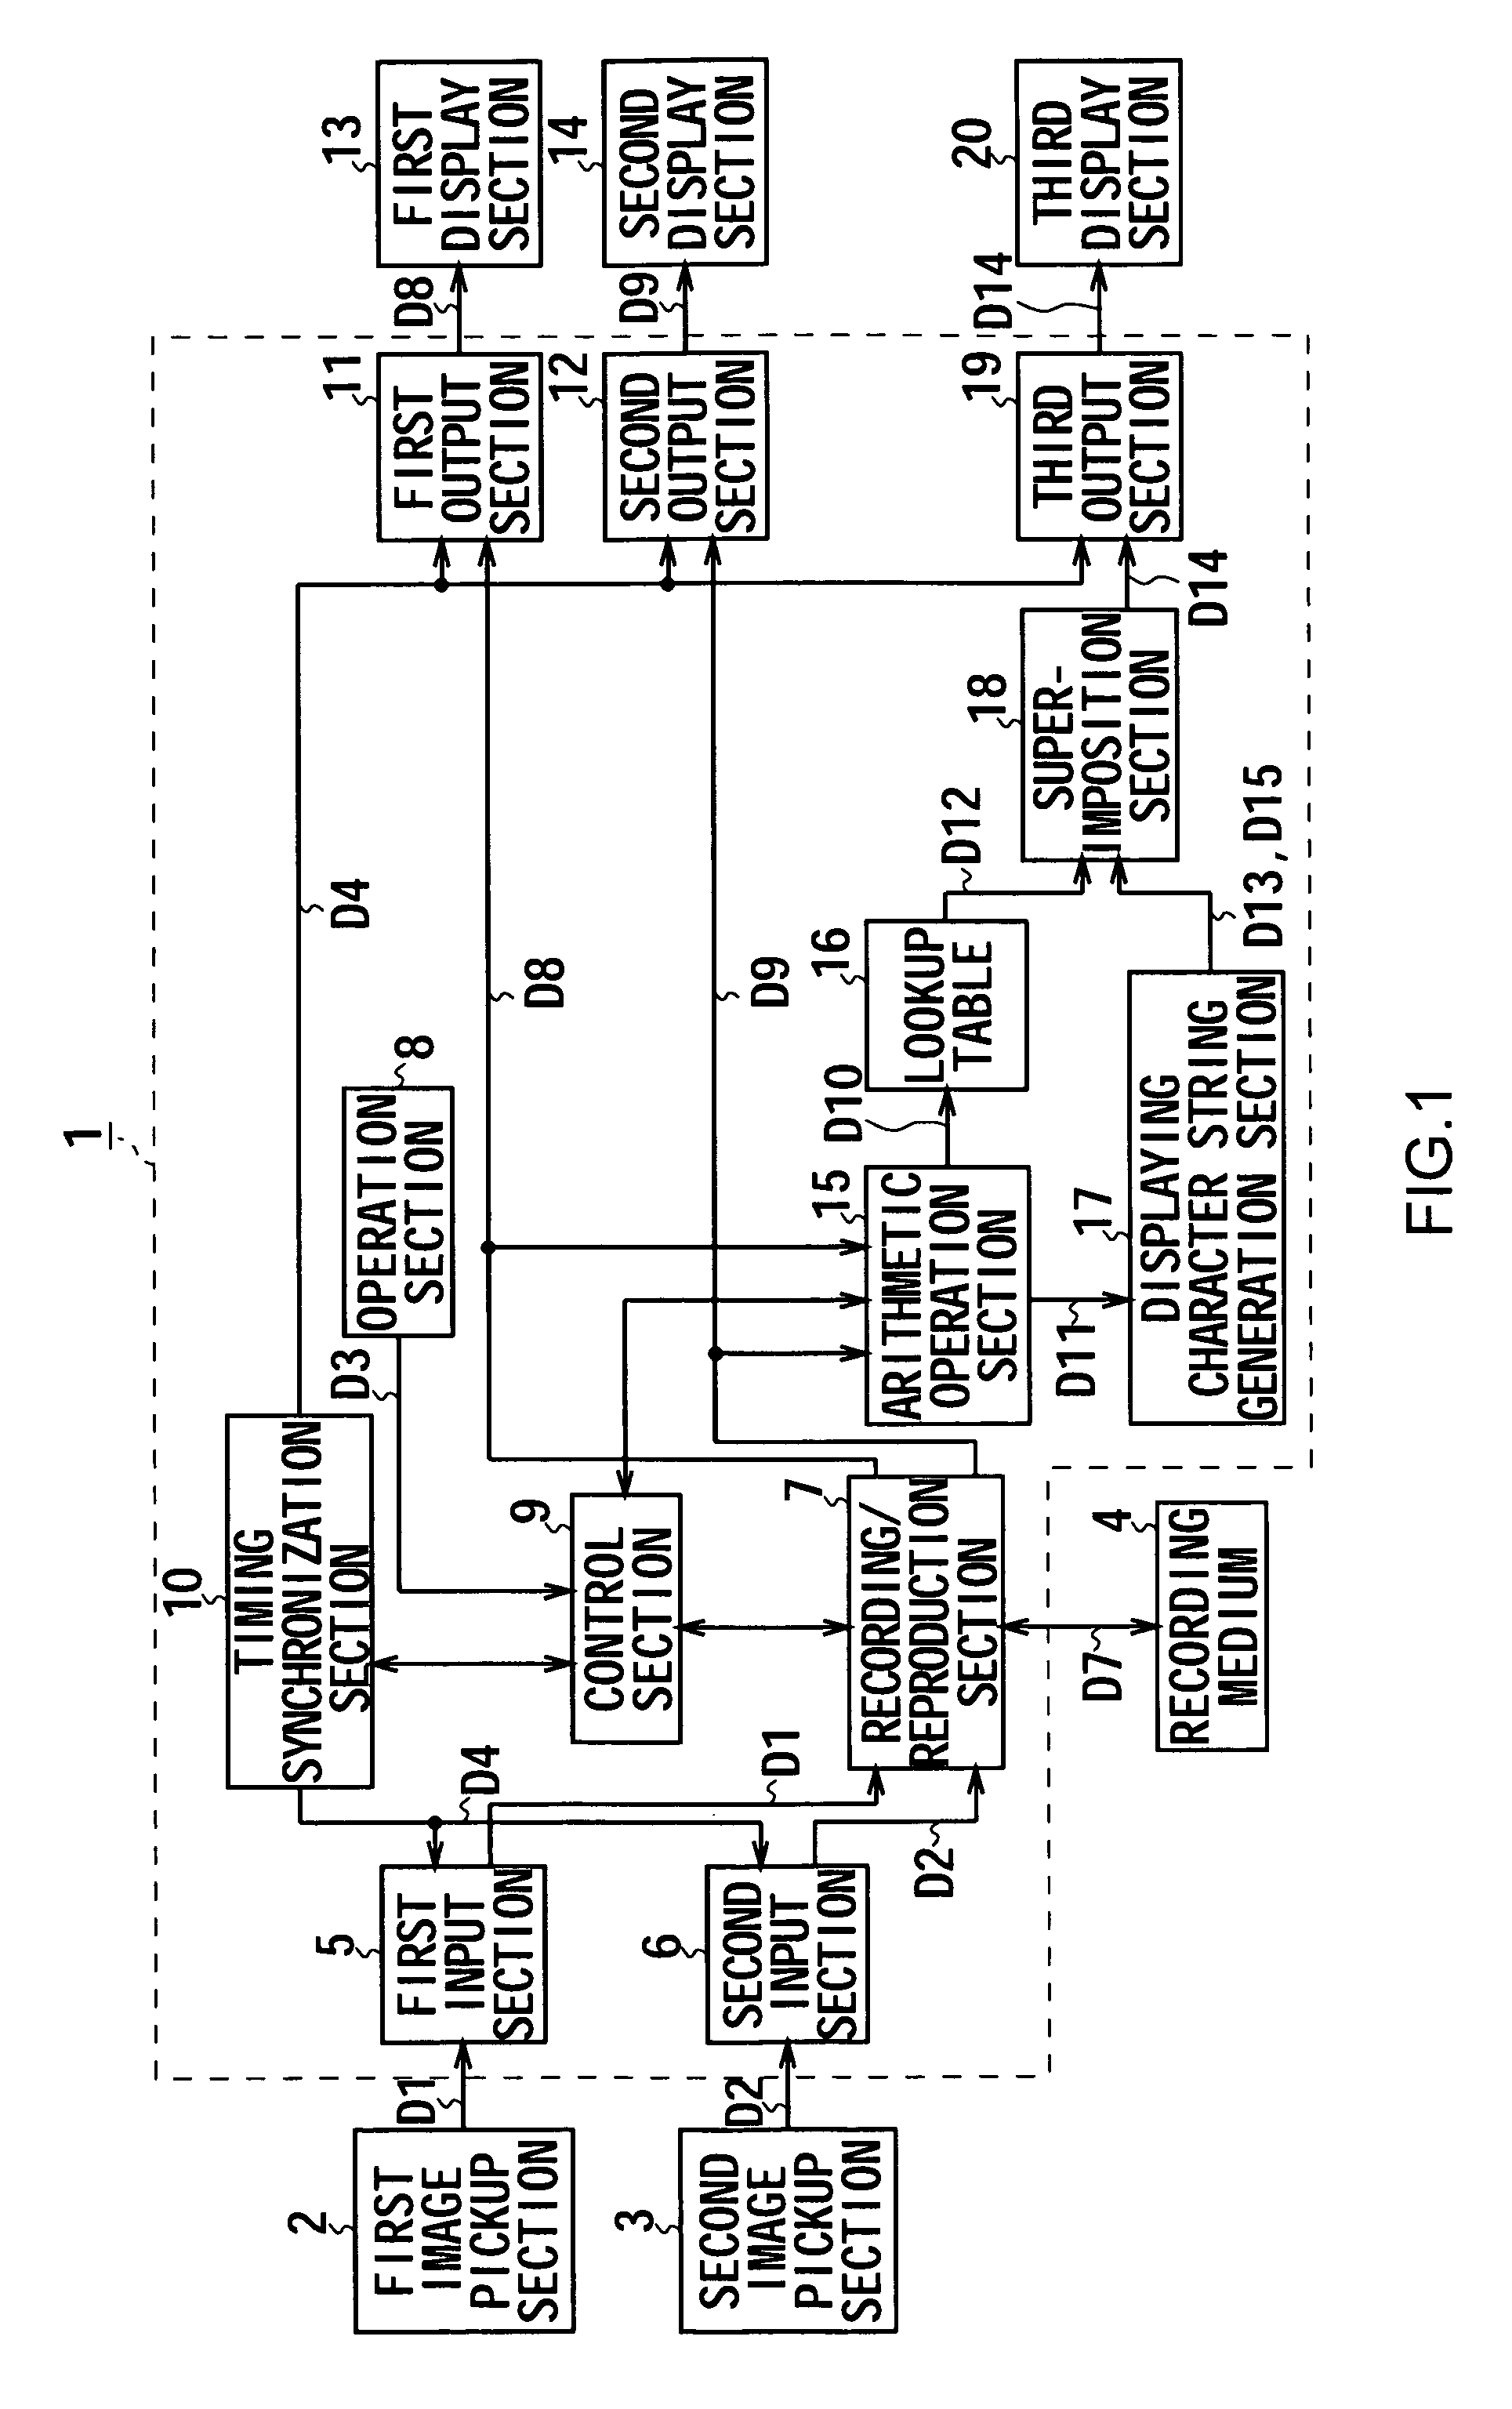 Recording/reproduction apparatus, and recording/reproduction method as well as stereoscopic images visual effects confirmation apparatus and stereoscopic image visual effects confirmation method